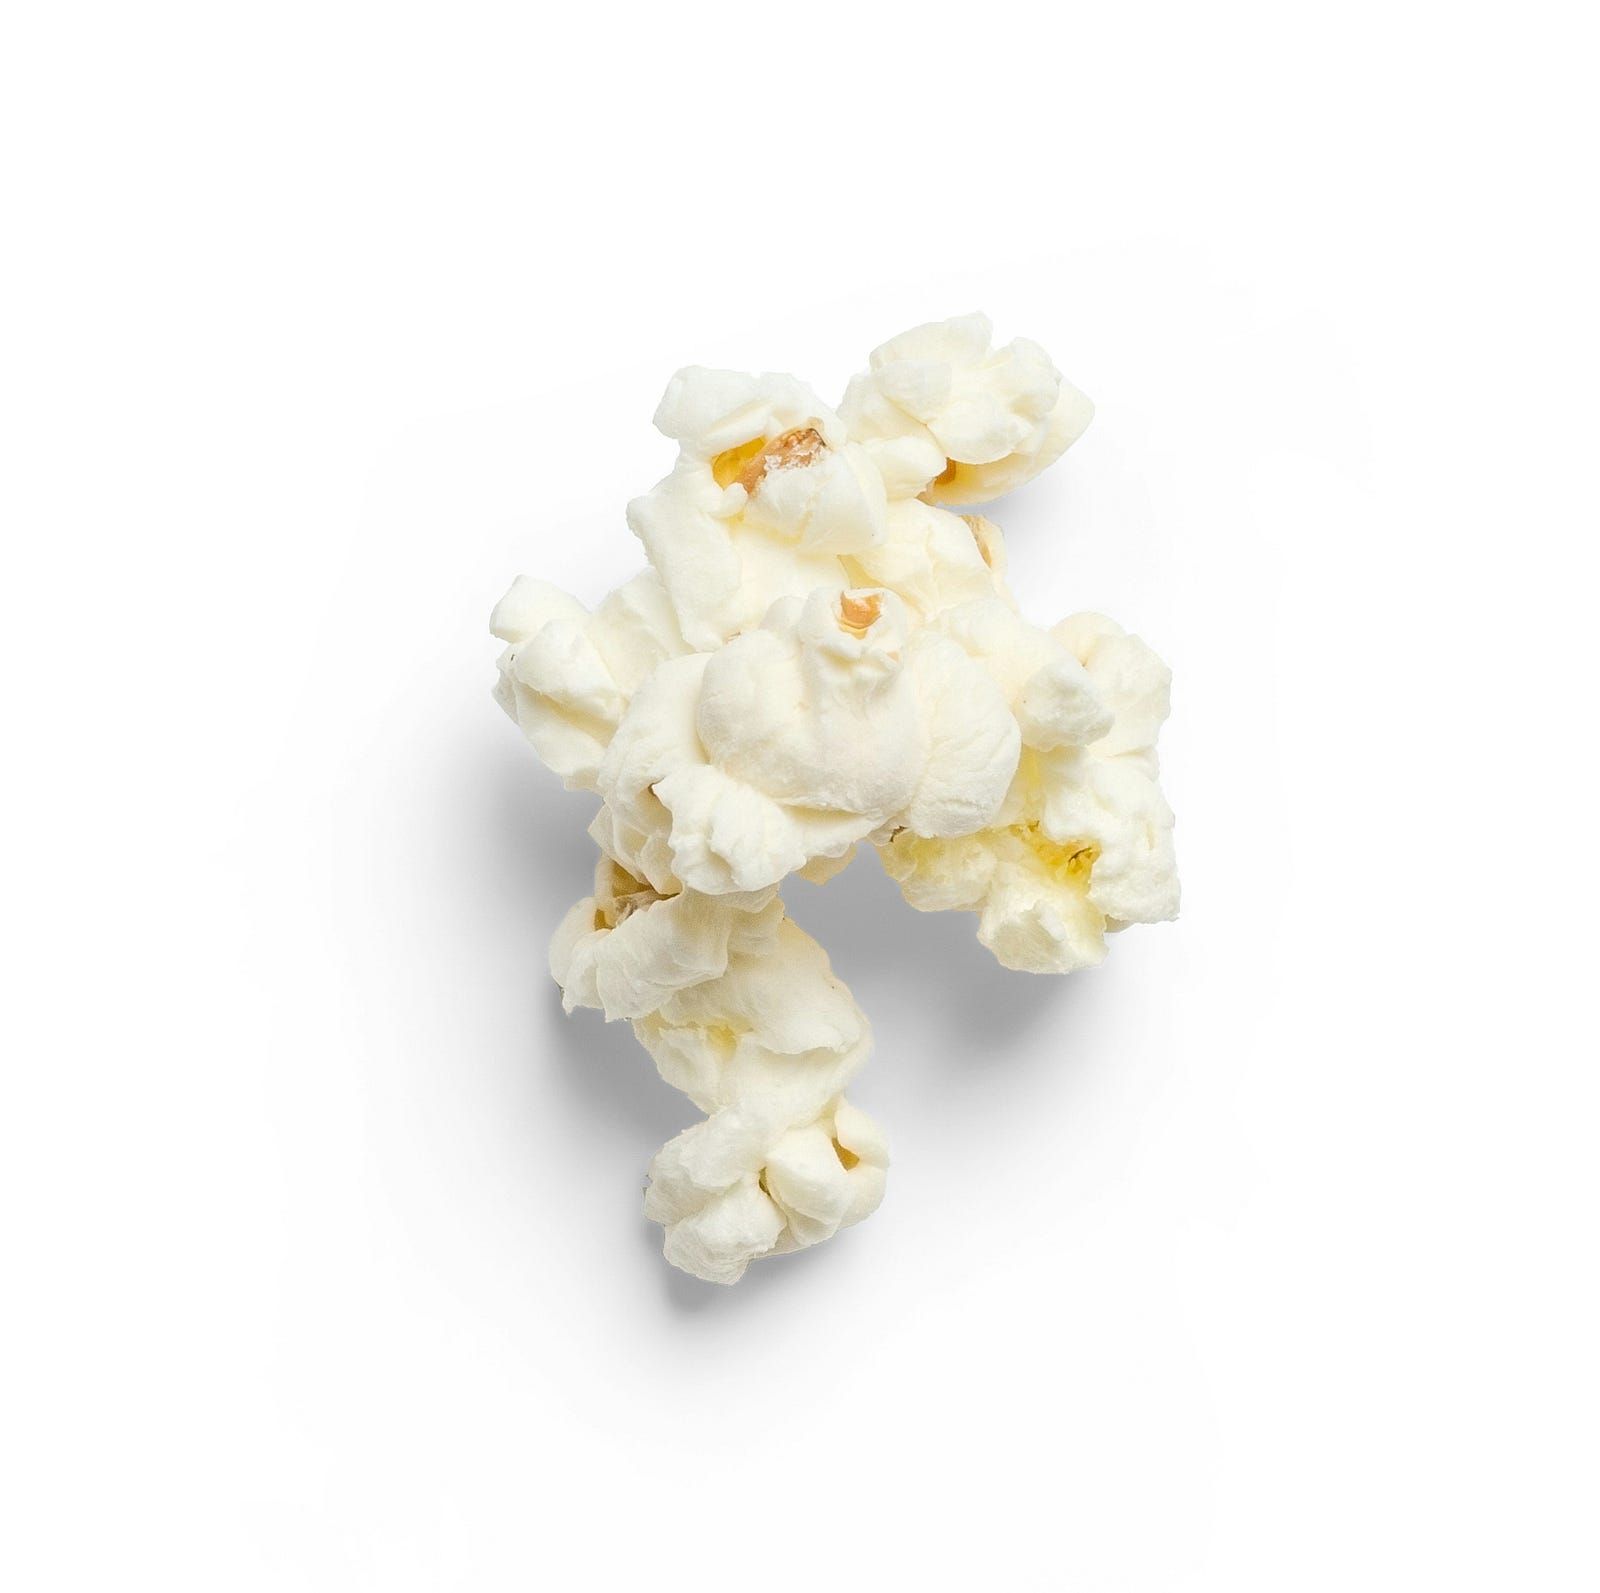 A piece of popcorn. Popcorn has fiber, which may reduce your risk of diabetes.